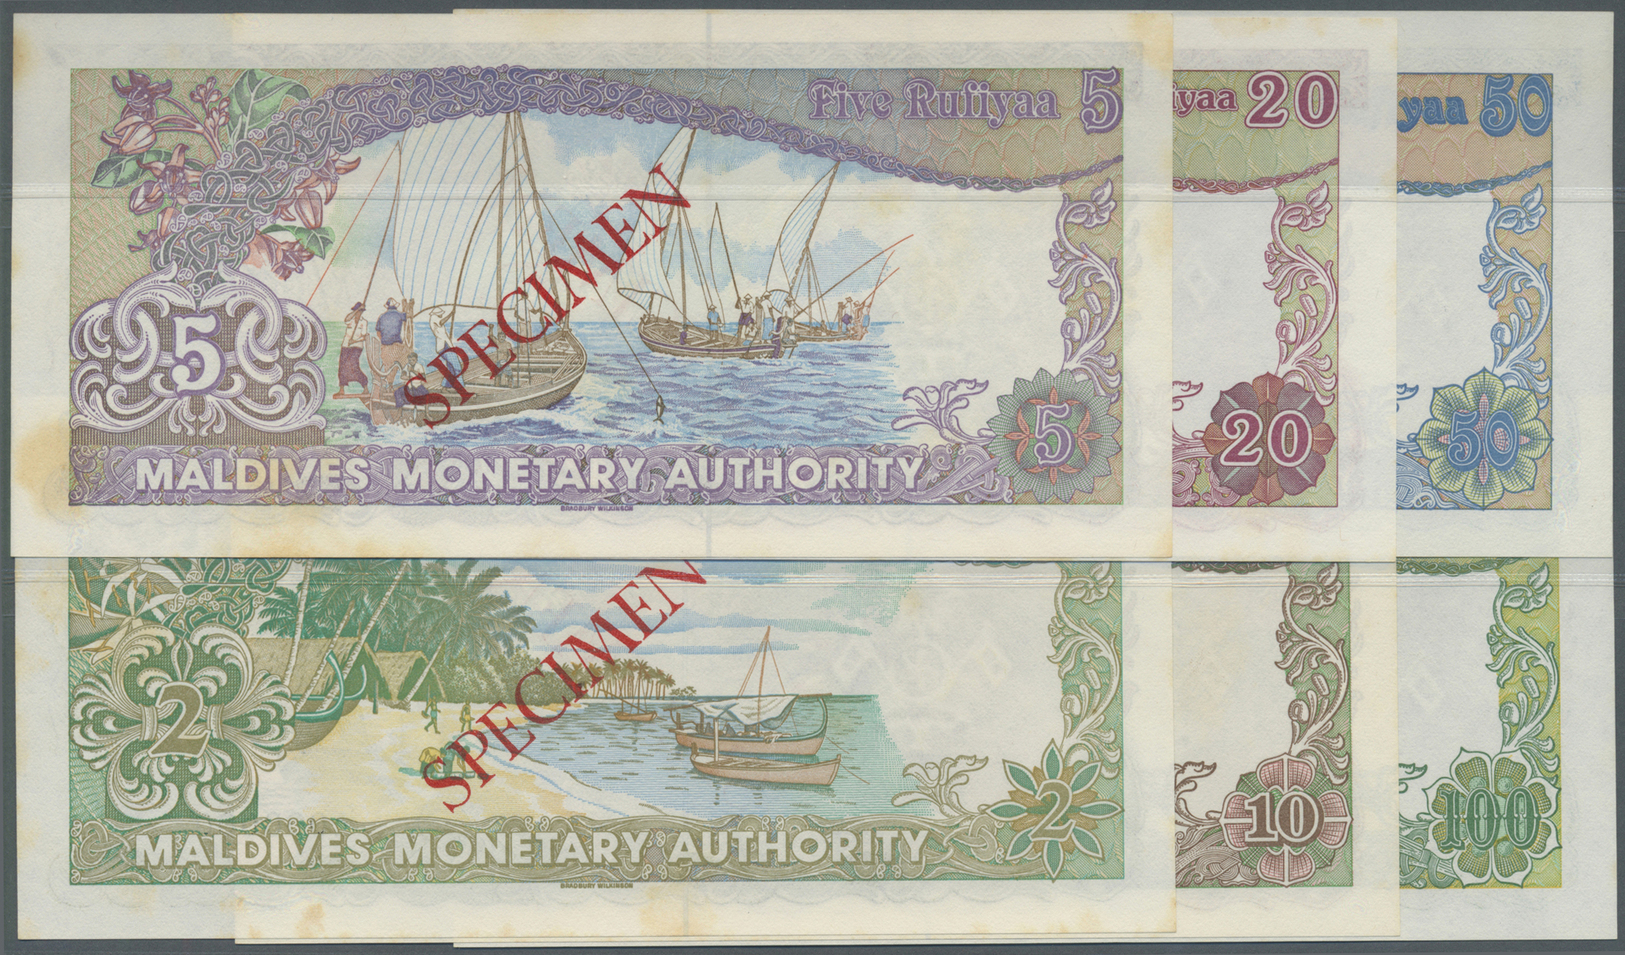 01648 Maldives / Malediven: Set Of 6 Specimen Notes From 2 To 100 Rupees 1983 P. 9s-14s Some With Foxing In Paper But Un - Maldives